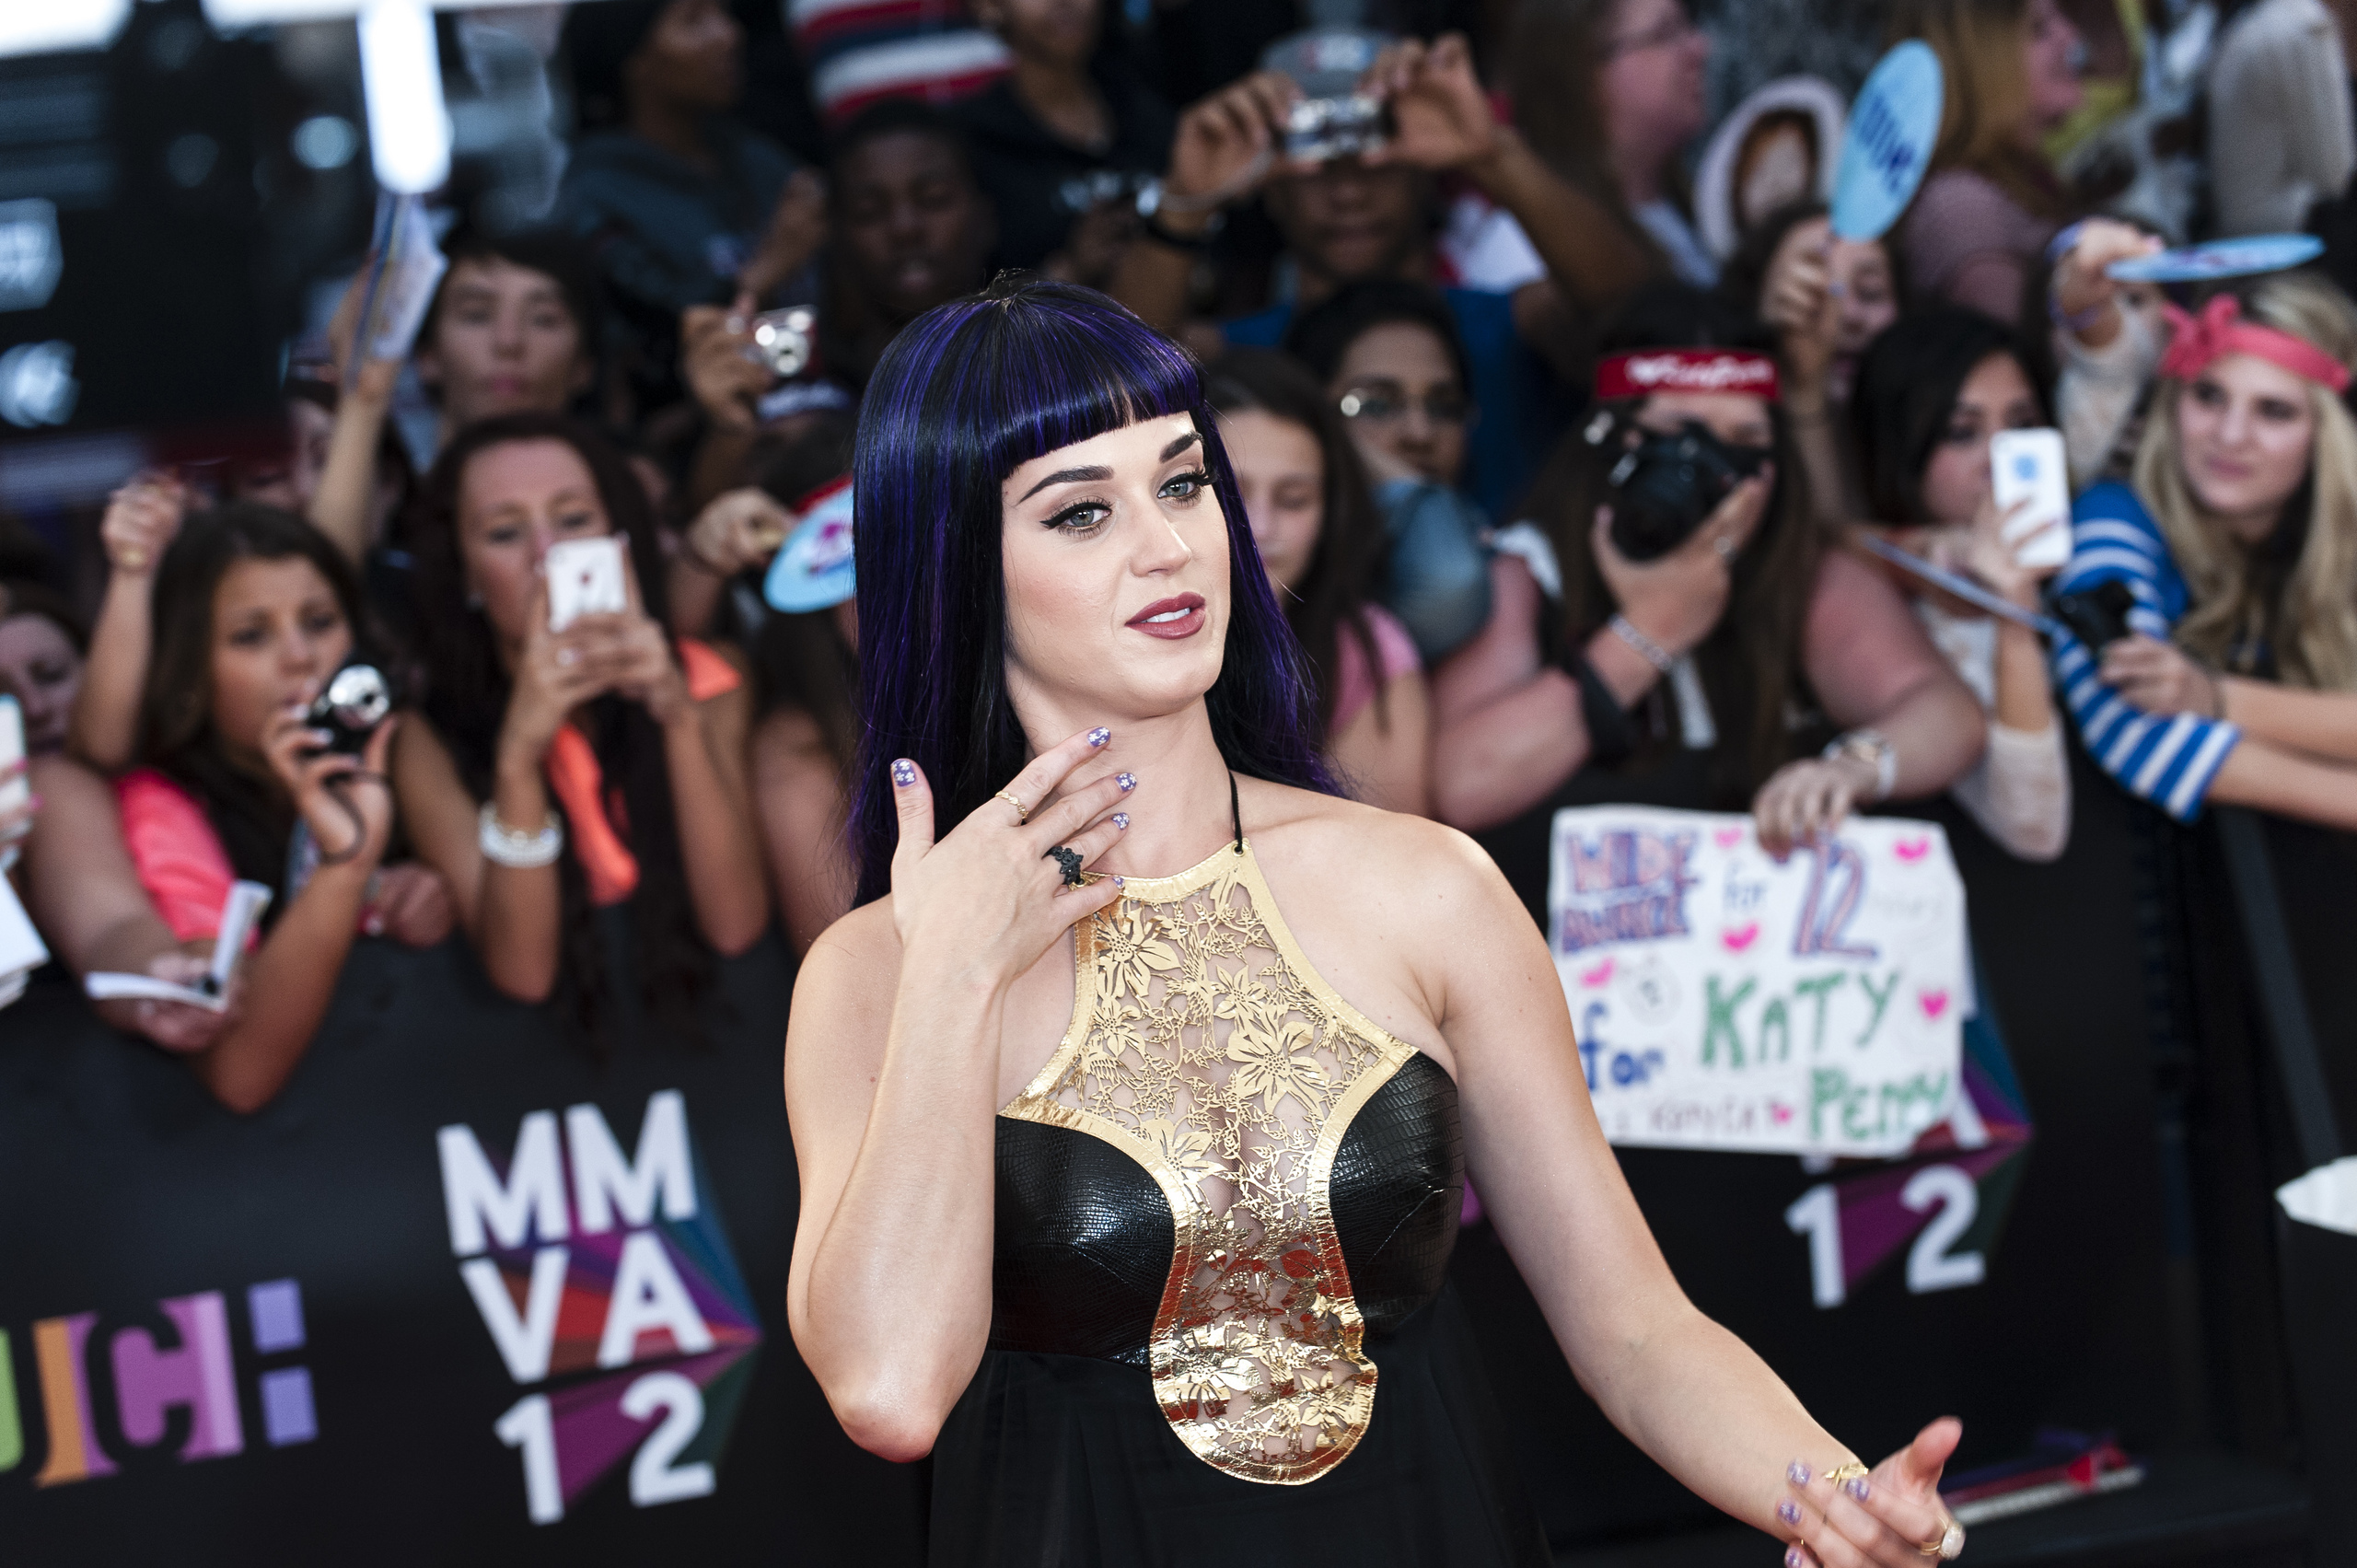 Katy Perry Images on Fanpop.